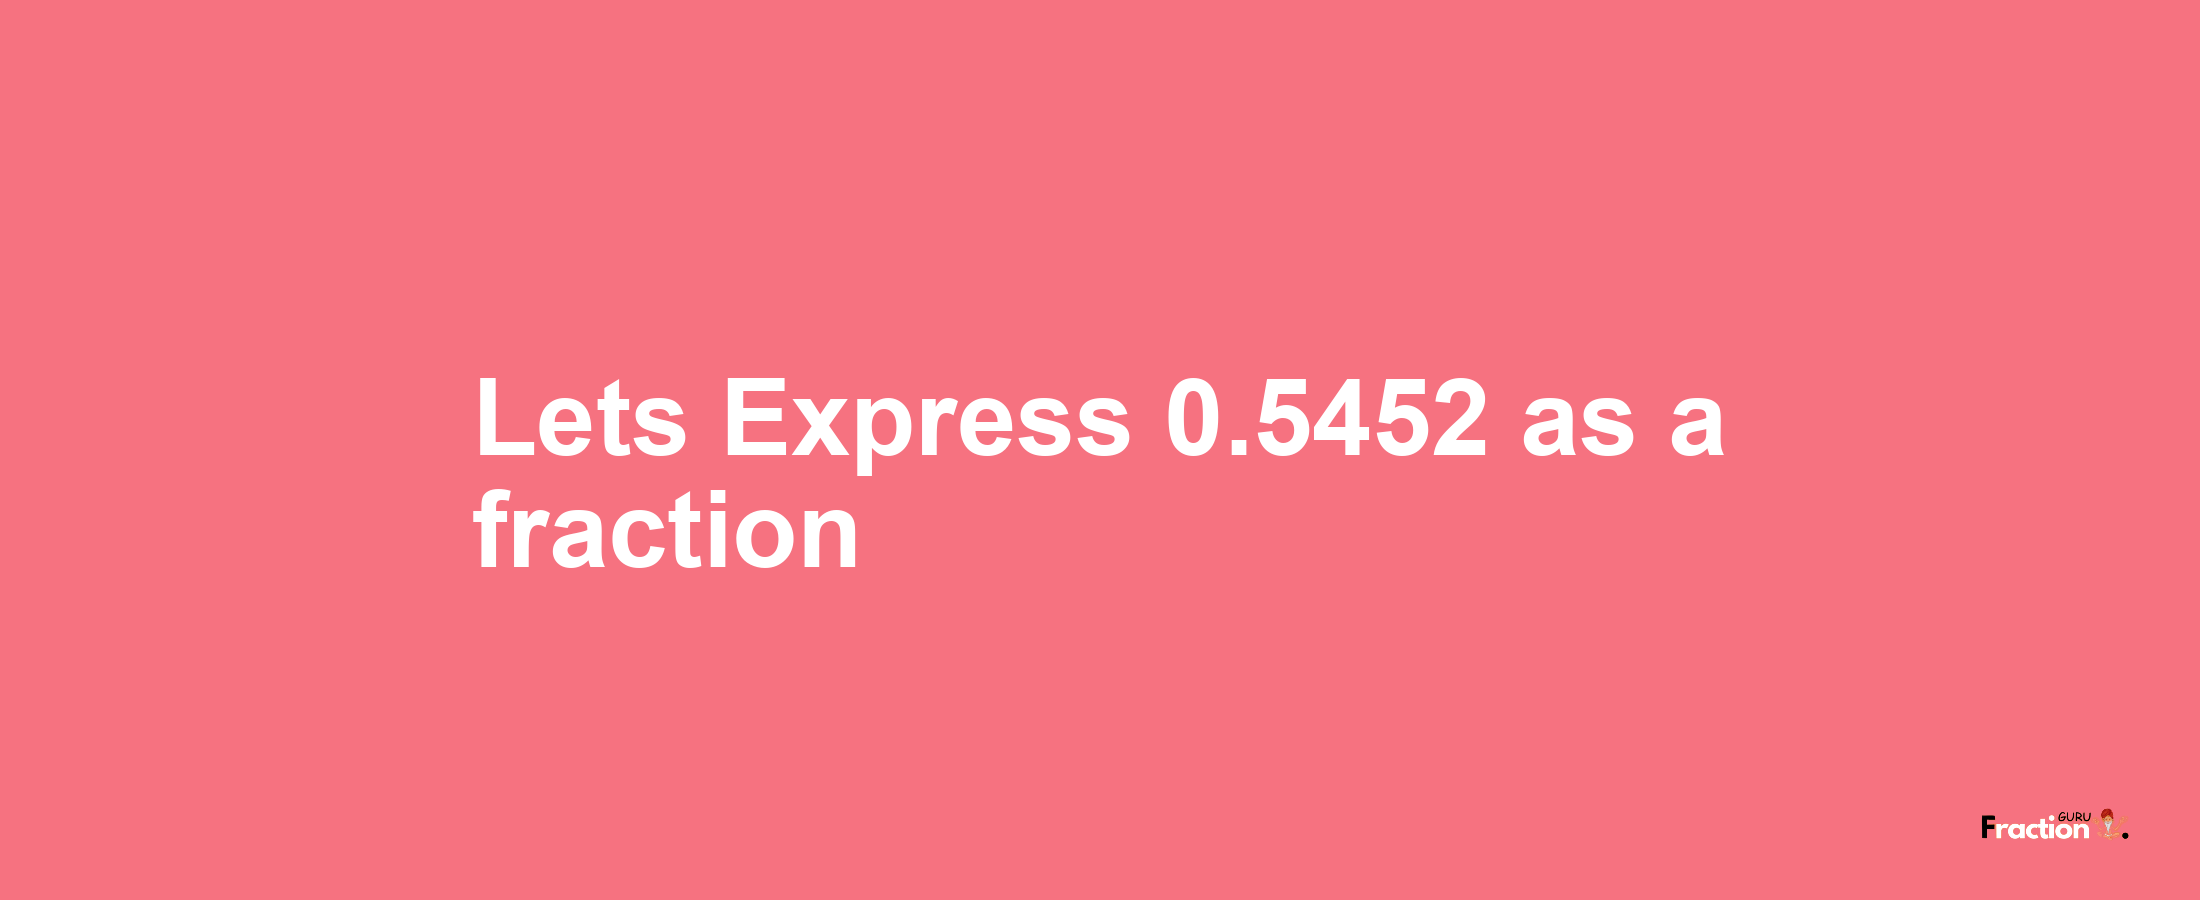 Lets Express 0.5452 as afraction